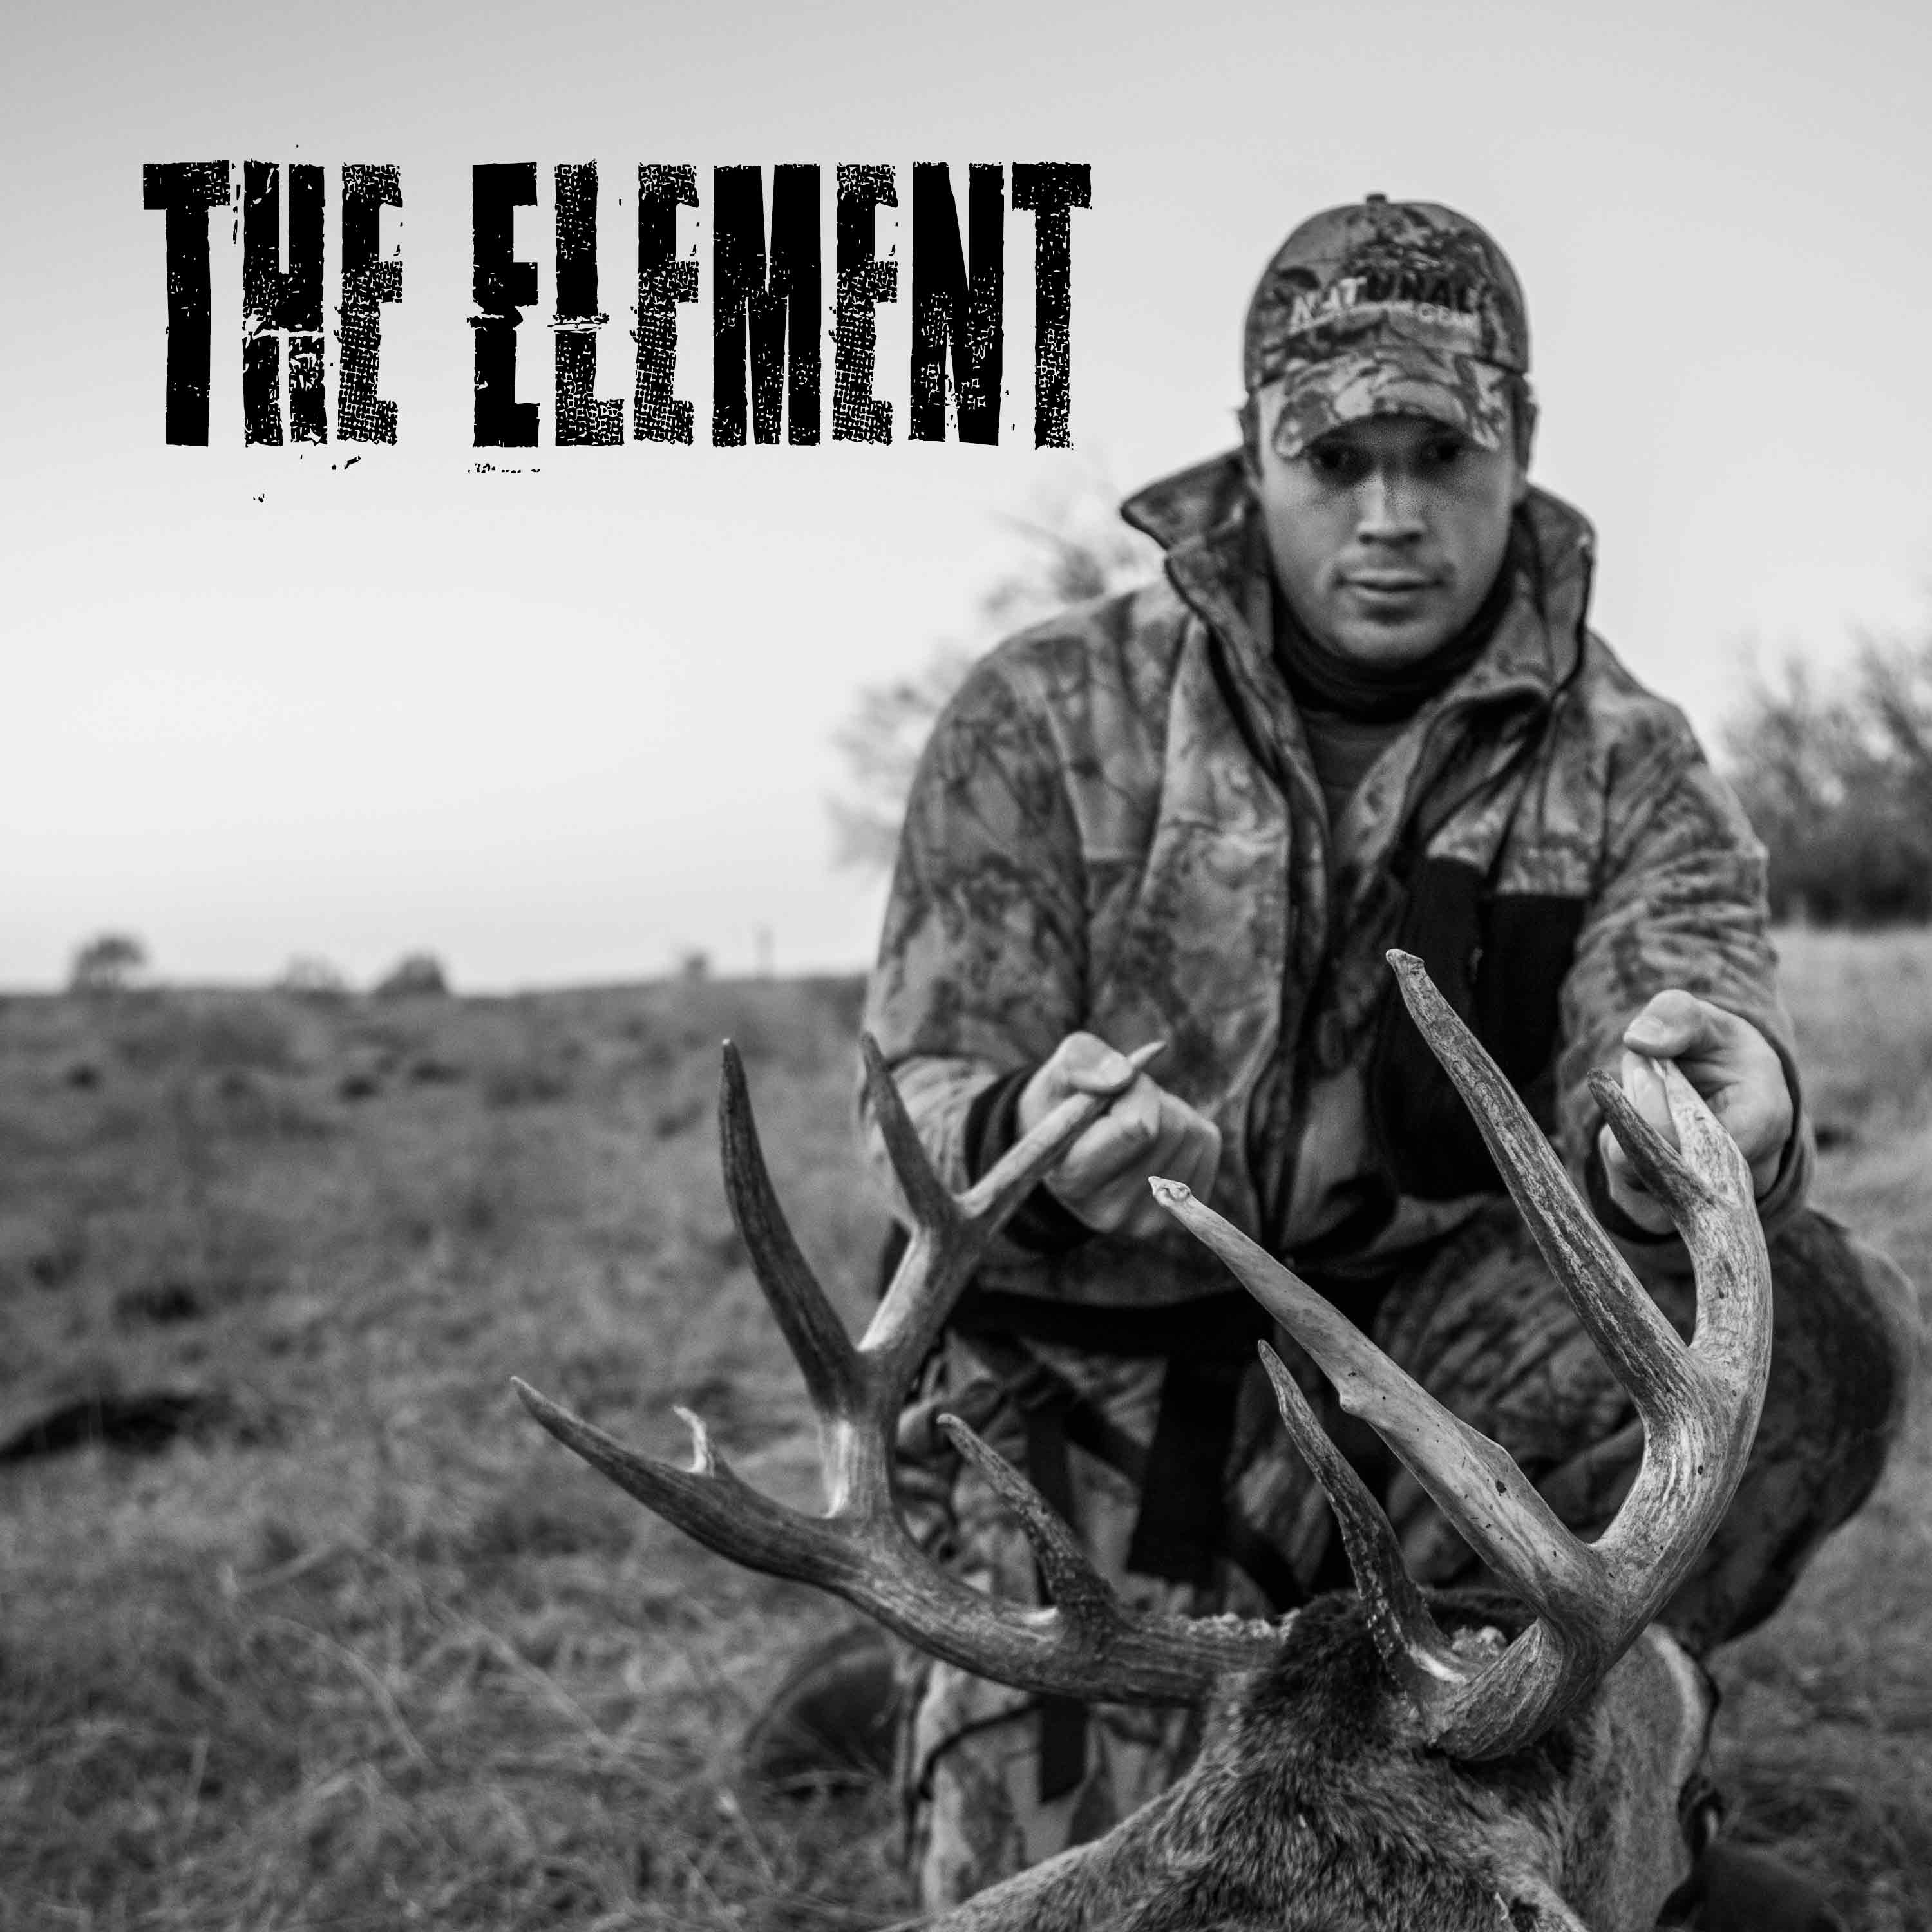 E200: Bill's Big Bucks (feat. Bill Winke, Founder of Midwest Whitetail on Lessons Learned With Years of Archery Hunting Deer, Hunting Multiple States Like Iowa, Texas, and Colorado, Booner Bucks)